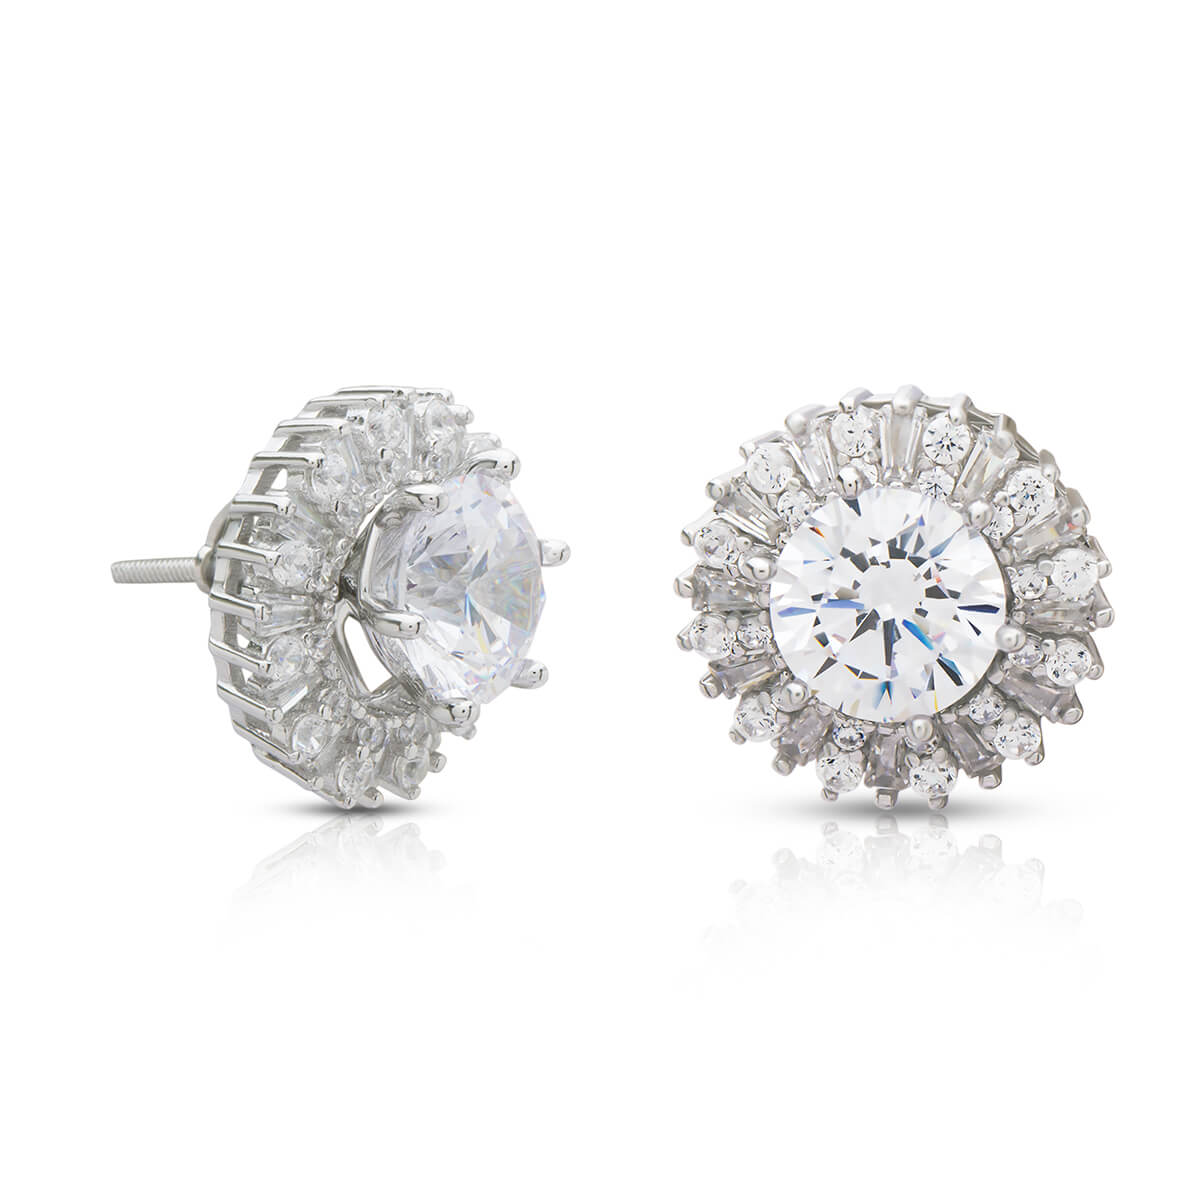 Shiny Solitaire Silver Stud Earrings